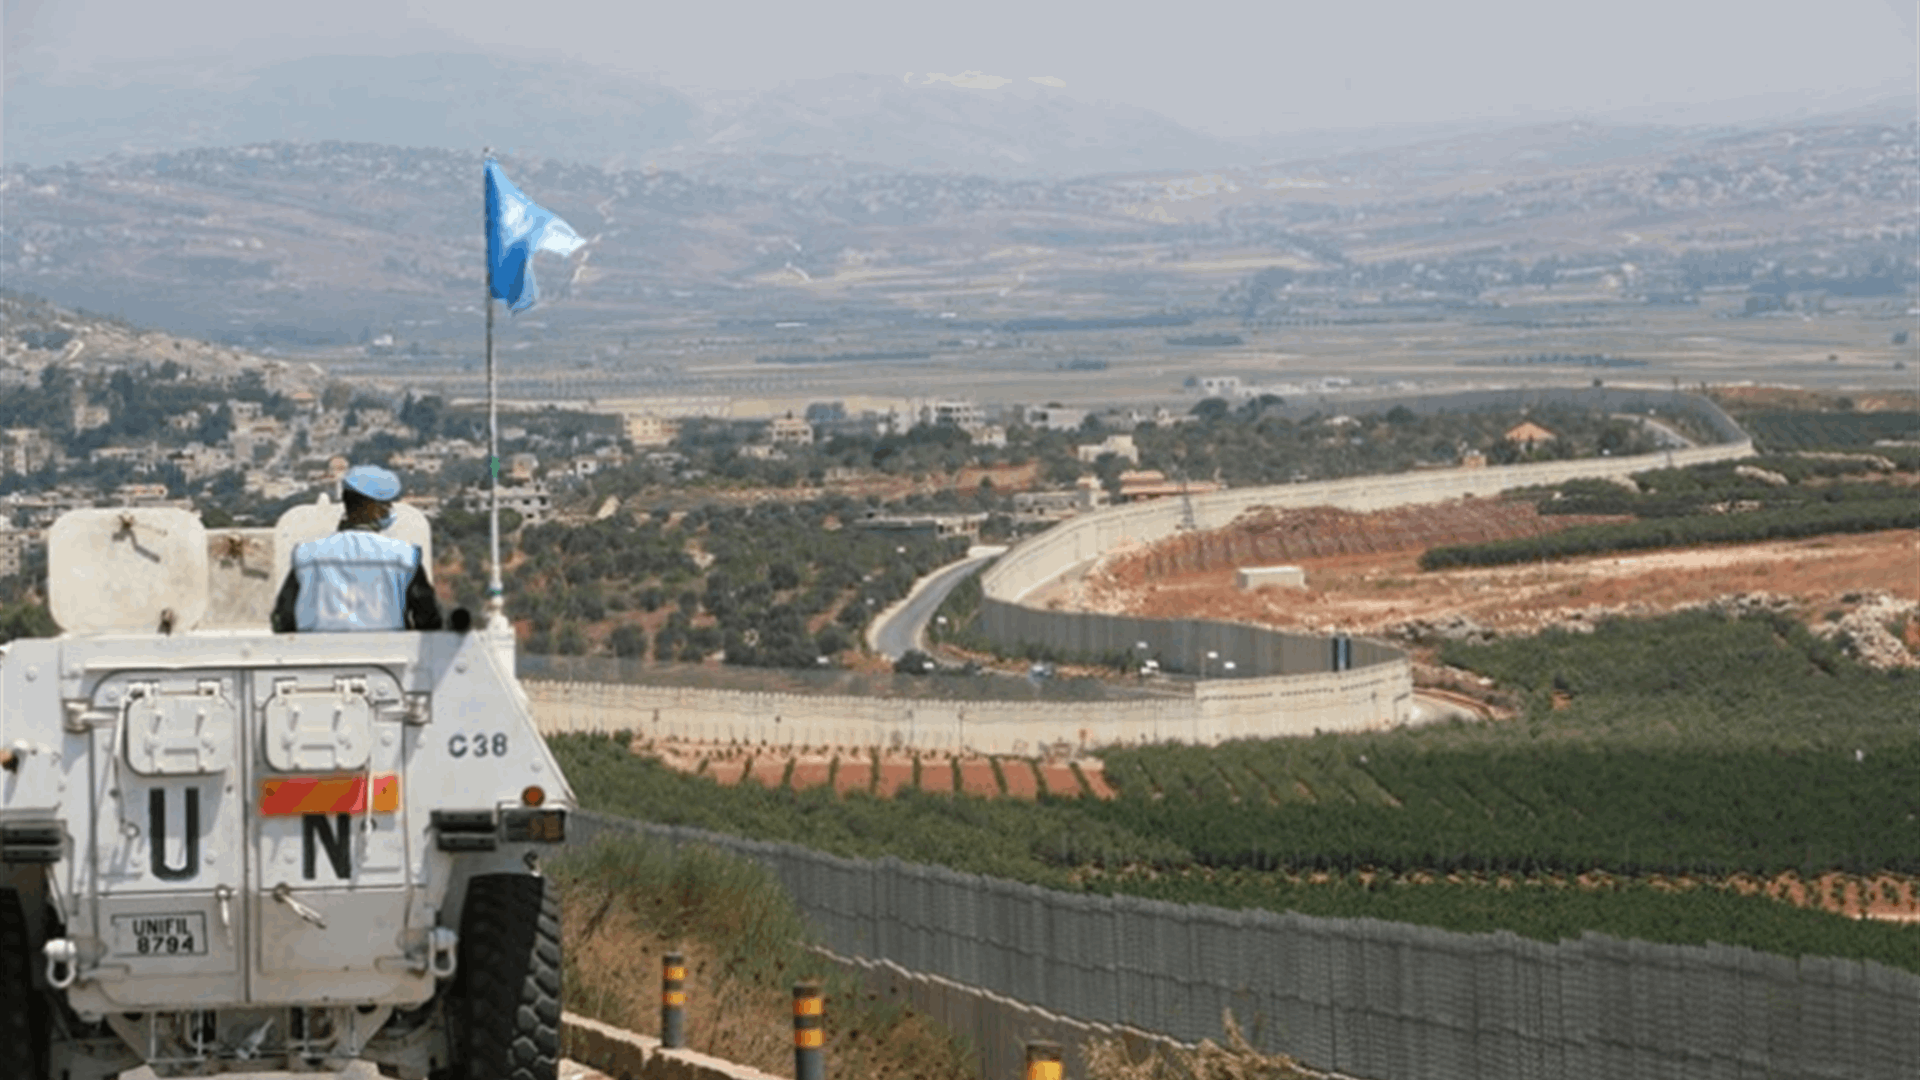 UNIFIL engages with authorities to prevent tensions over tents near Blue Line